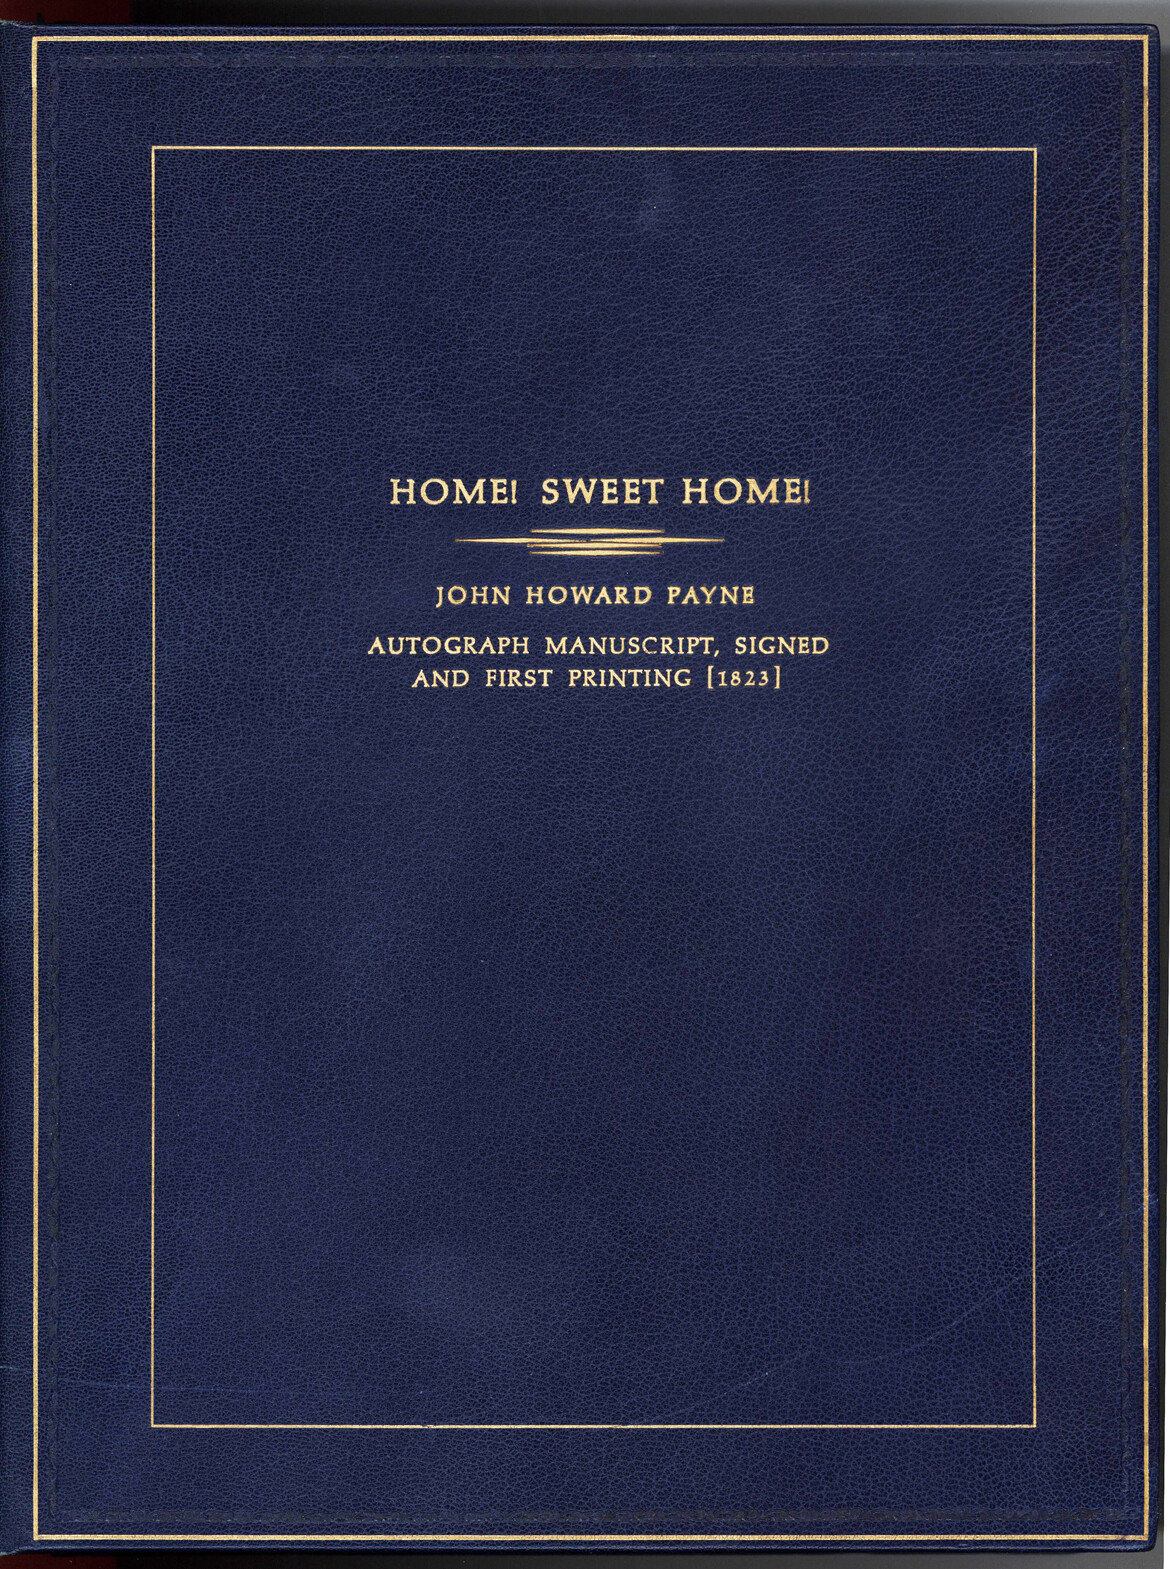 Fair Copy of the First Two Verses of Home! Sweet Home!, the Most Popular American Song of the 19th Century